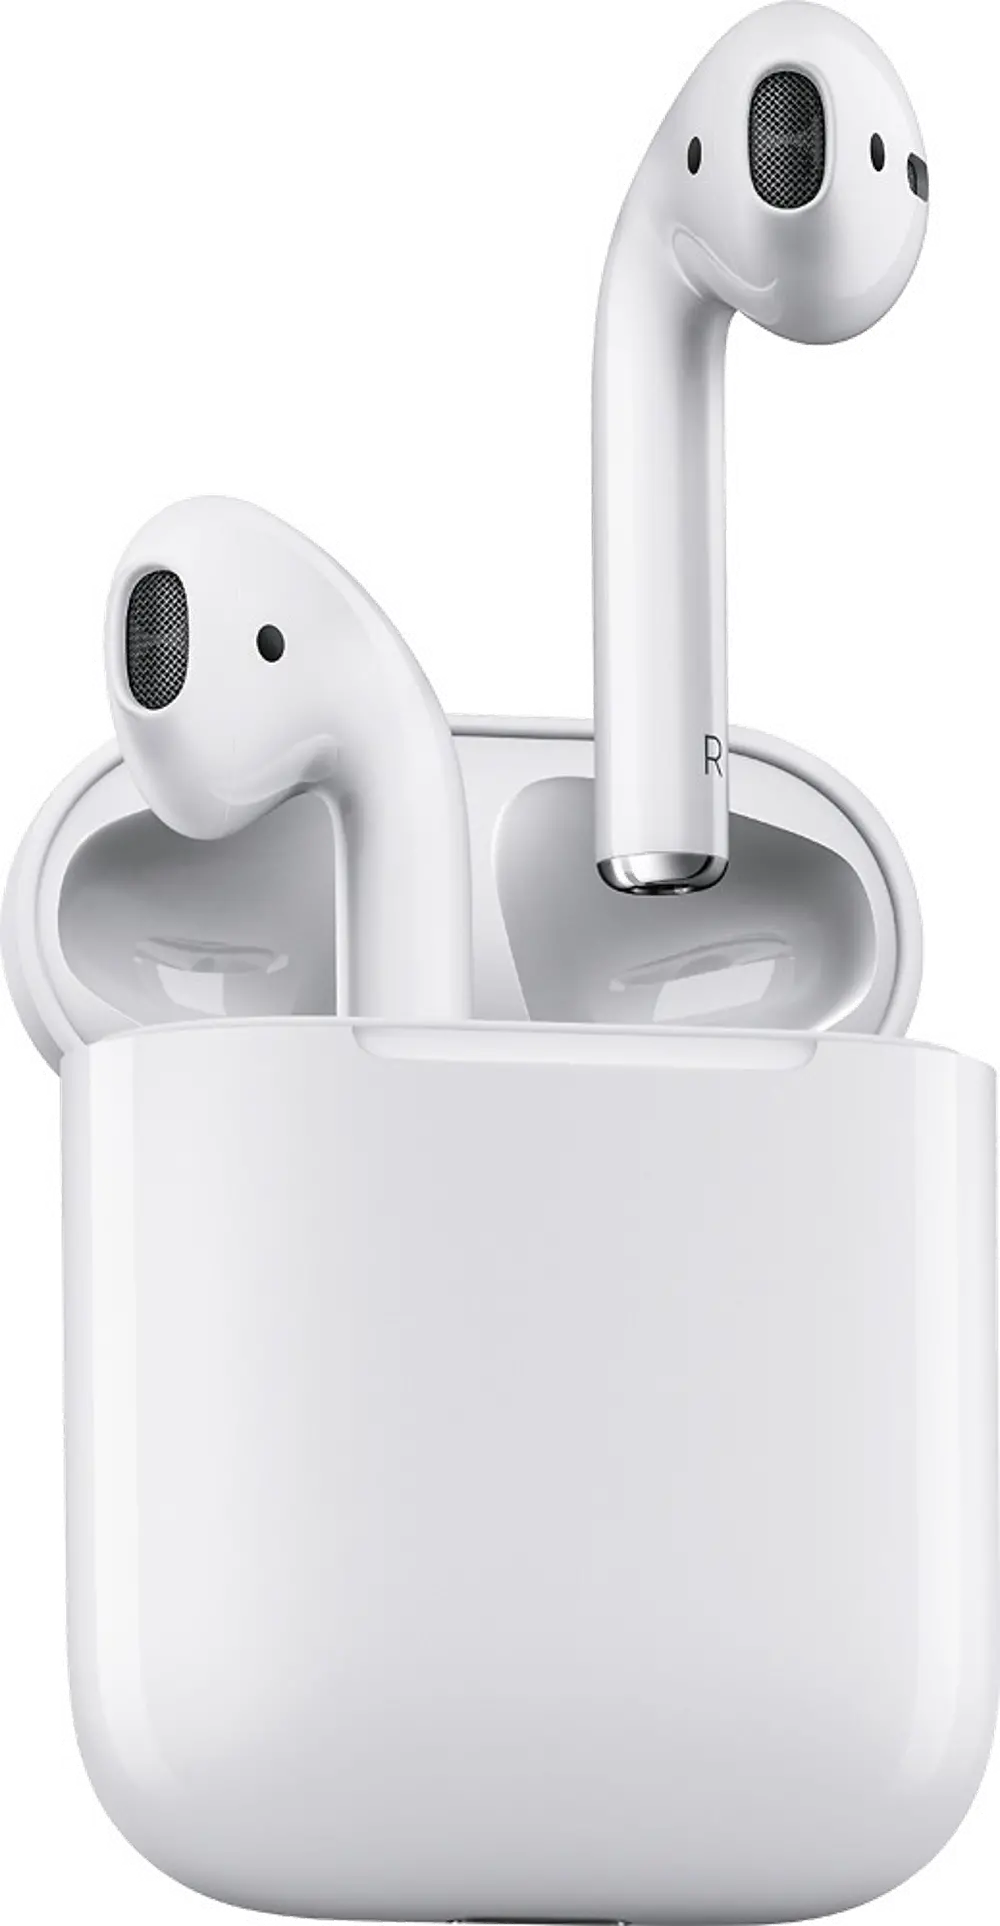 MMEF2AM/A,AIRPODS Apple AirPods - 1st Generation-1